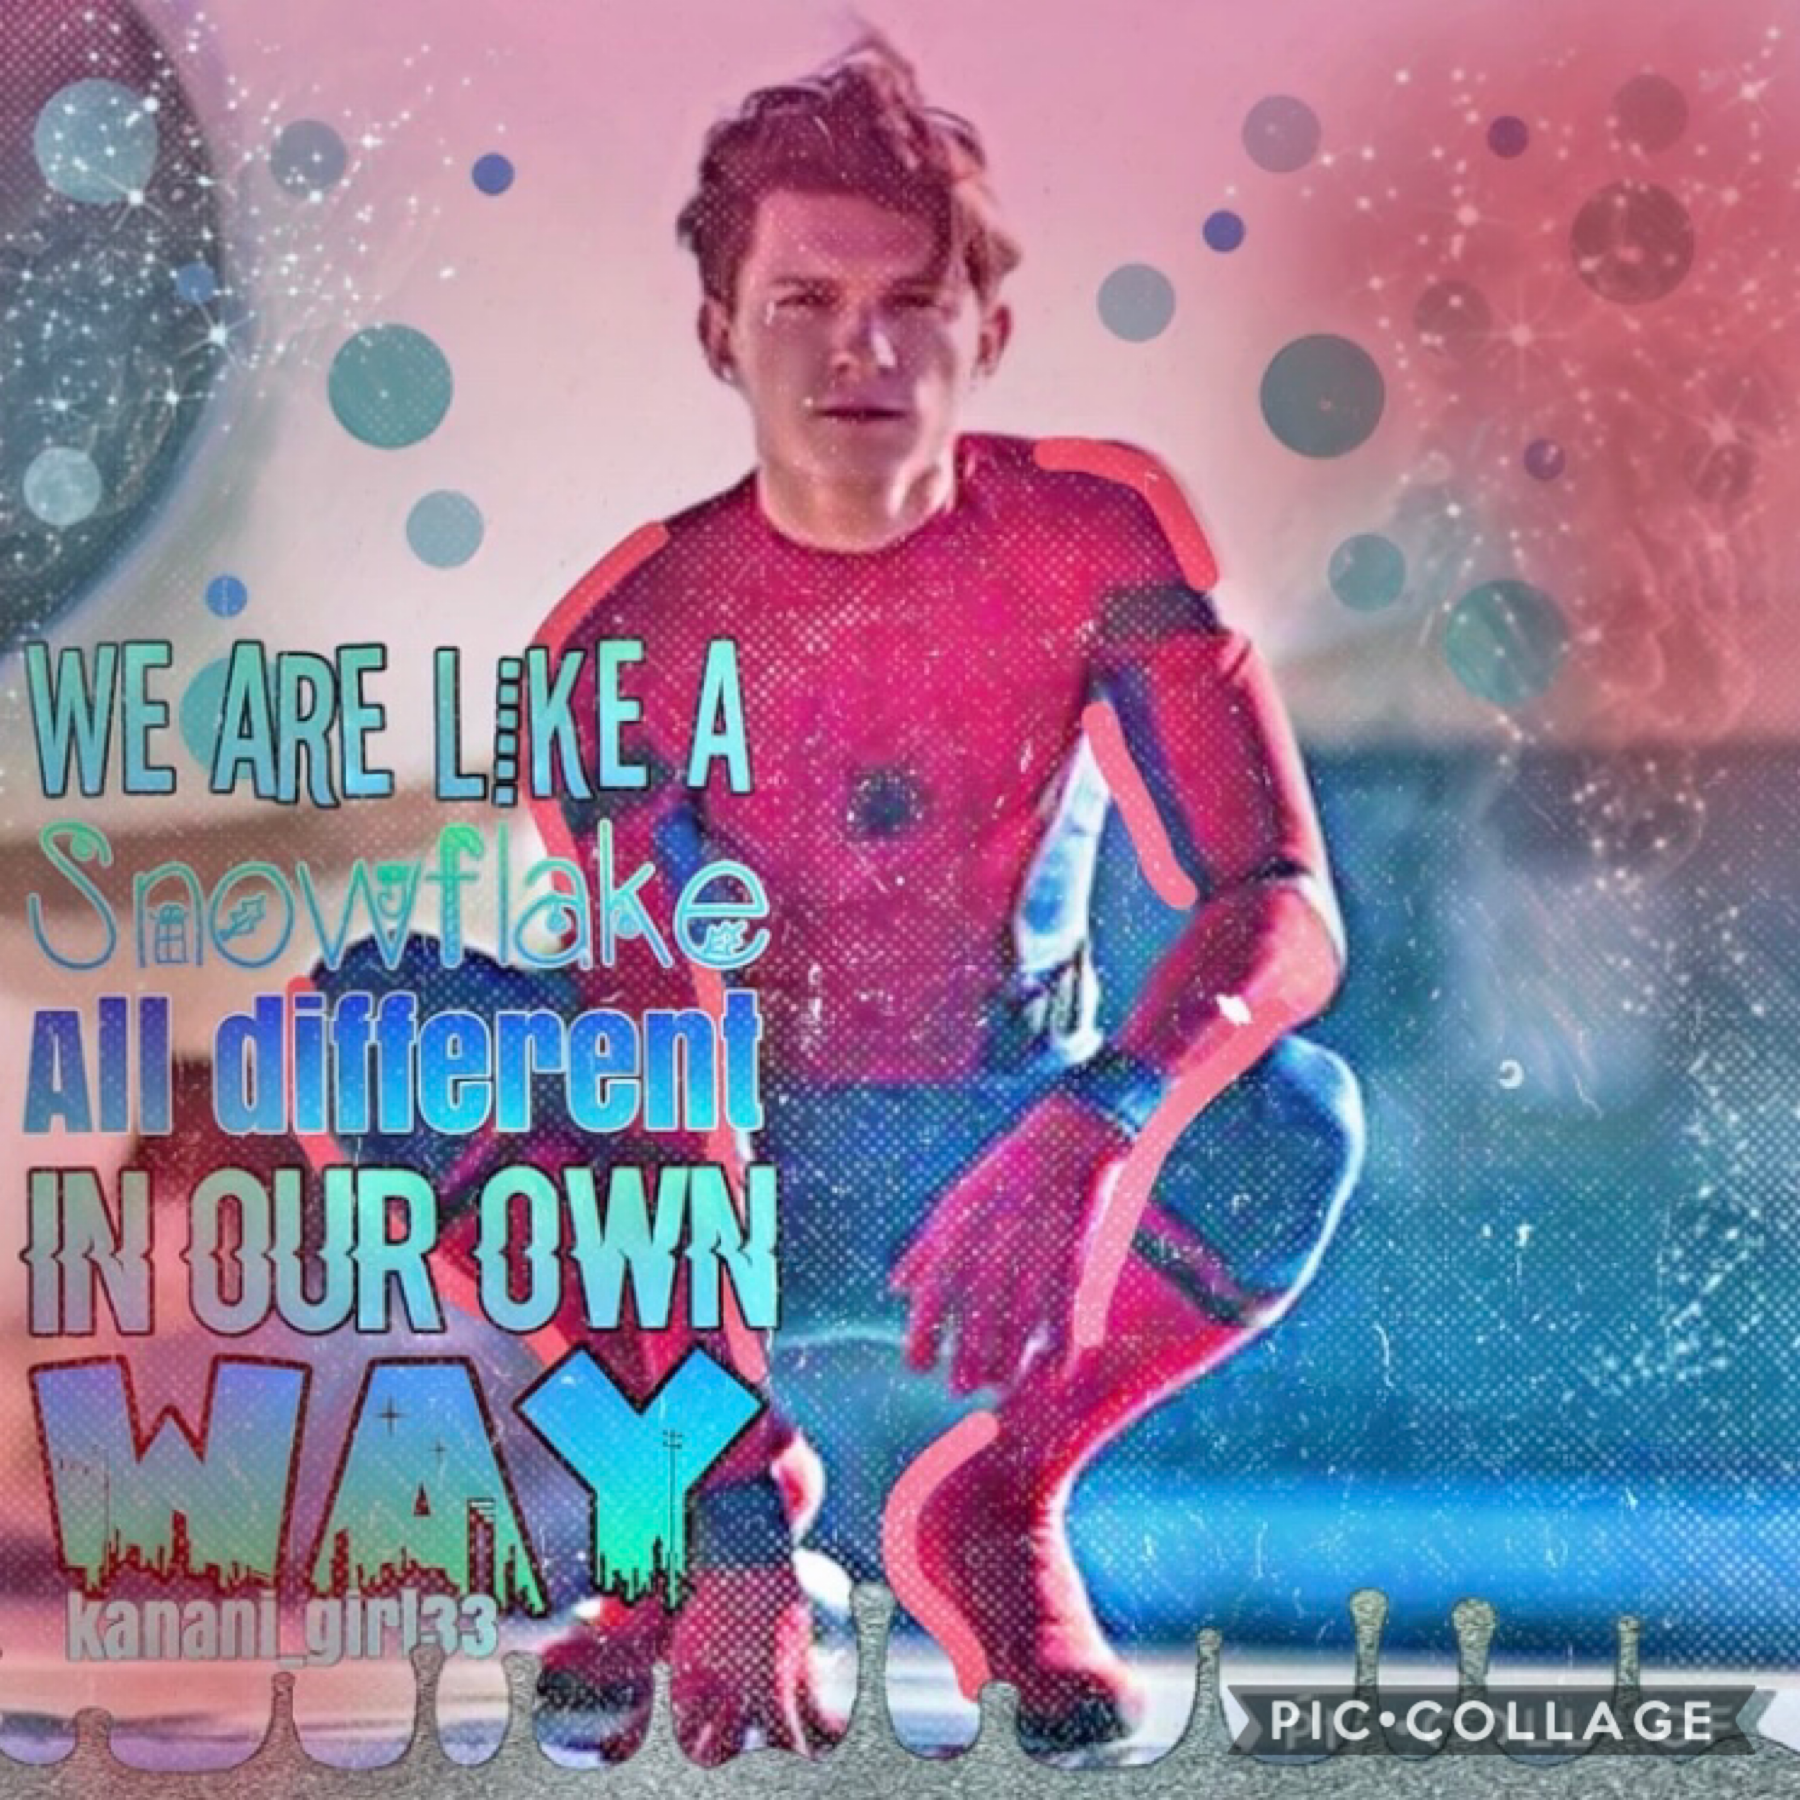 💕Tap💕
Who else loves Tom Holland??? Anyways this is for a contest! I have a Christmas gift for you guys that I’ll post on Christmas!! Happy Holidays everyone!! You’re all individually unique, just like a snowflake!! ♥️❄️☃️🎄♥️